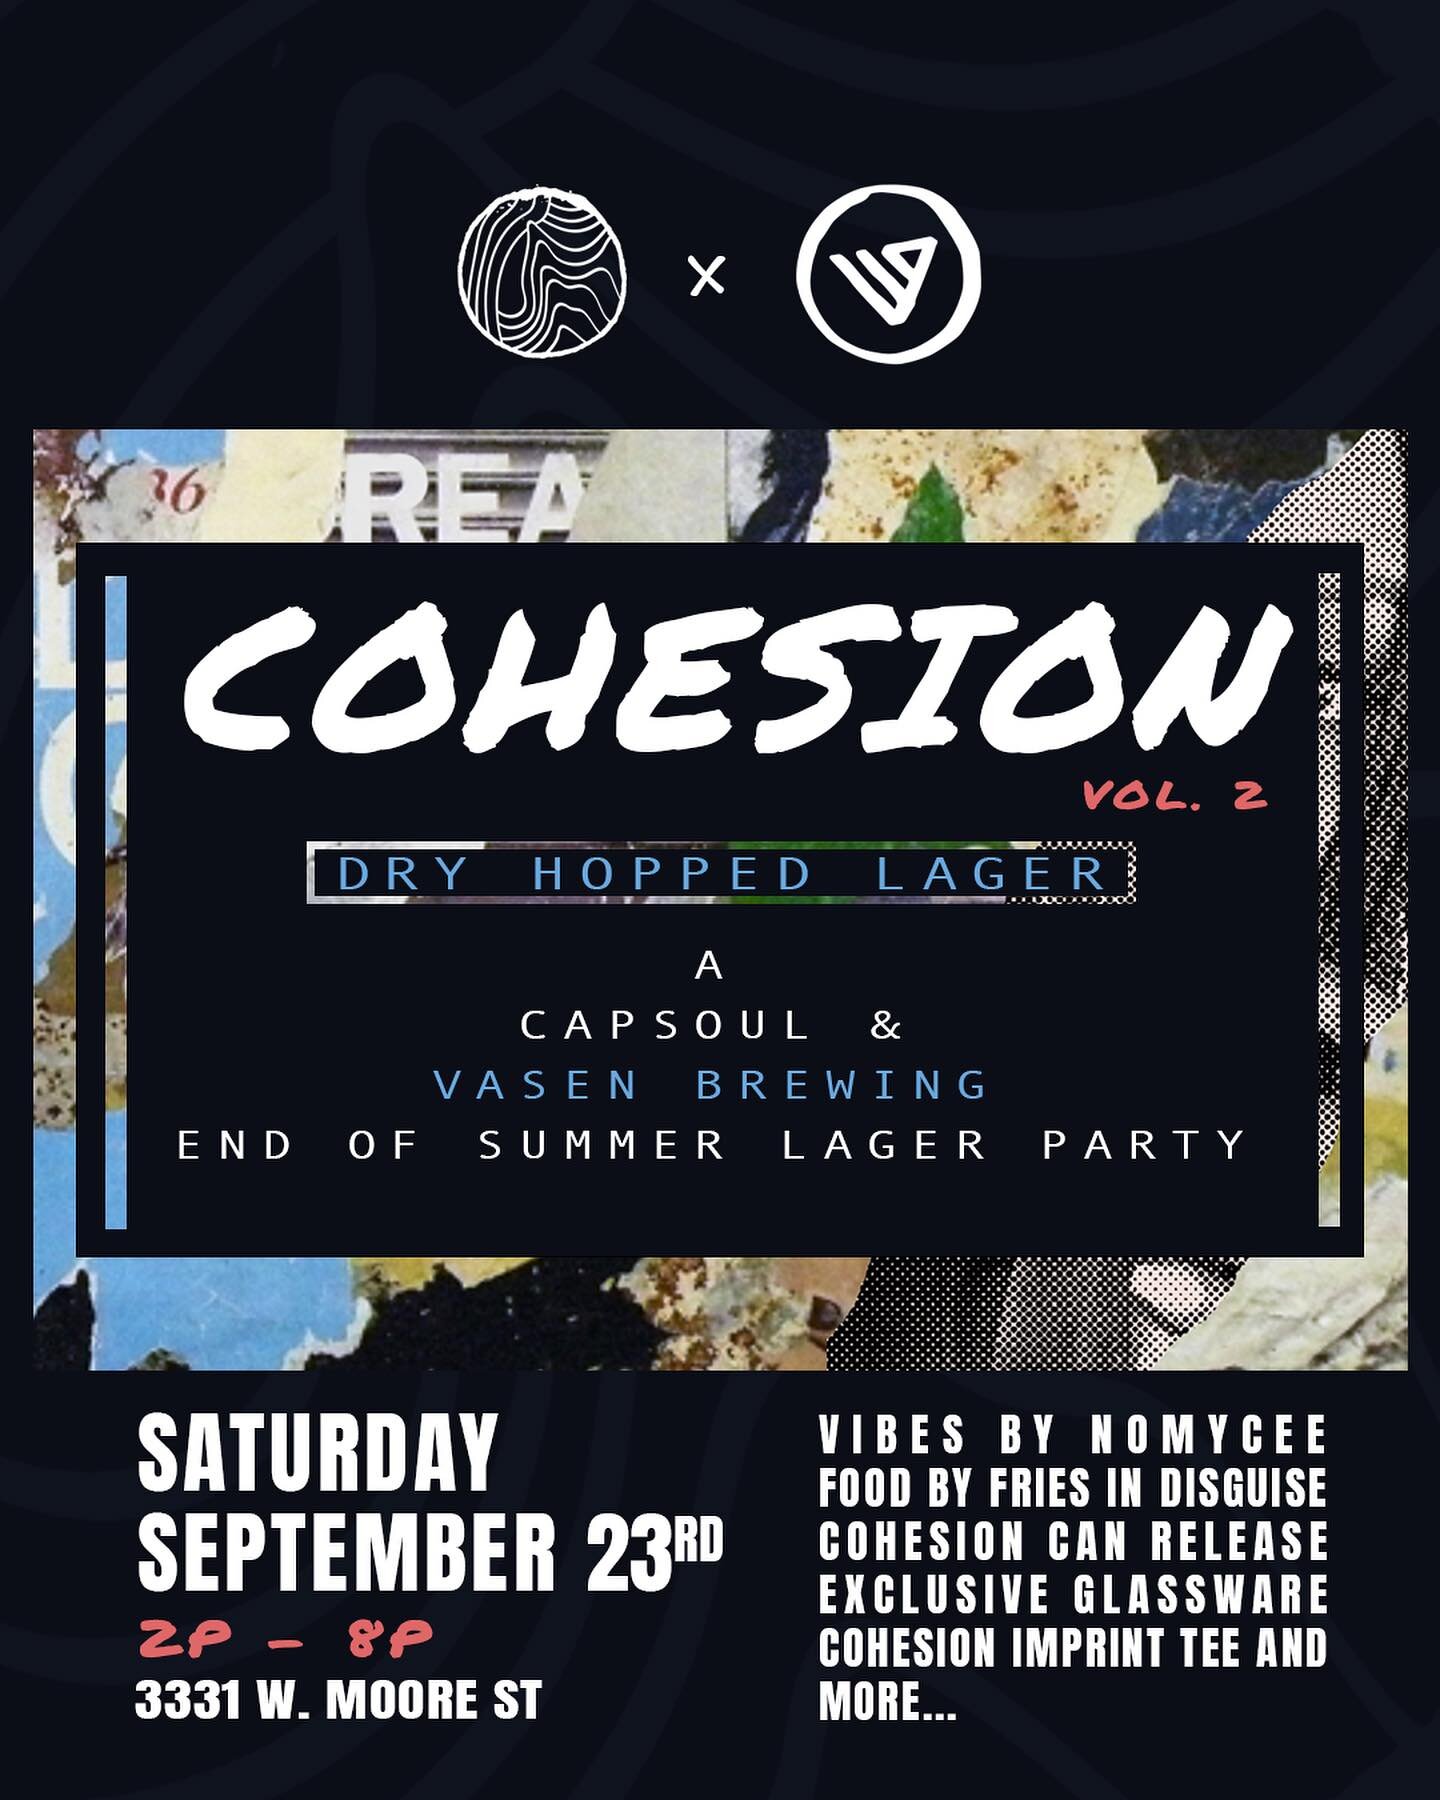 Hey fam!! 👋🏾 Tap in with us today at @vasenbrewing from 2p - 8p for the OFFICIAL can release of Cohesion Vol. 2, our Dry Hopped Lager, and celebrate with us at our End of Summer Lager Party with the vibes set by @nomycee from 5p - 8p. 🎉

We won't 